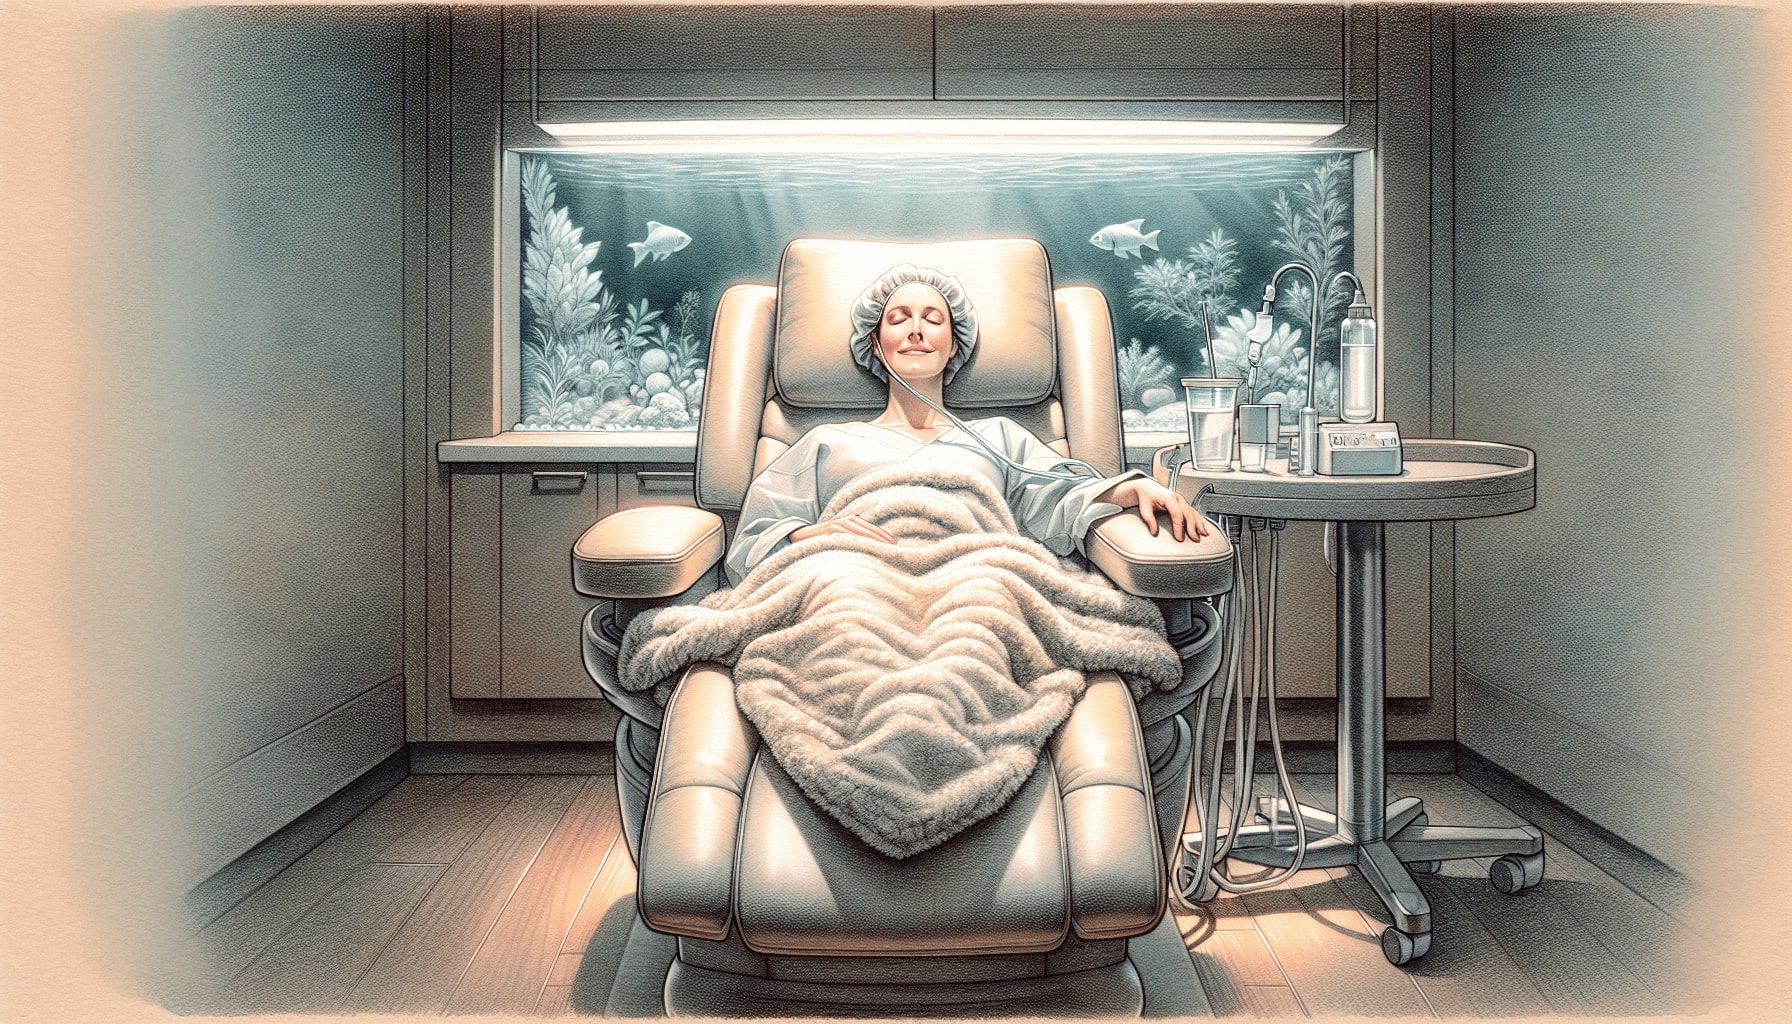 Illustration of a relaxed patient after IV sedation